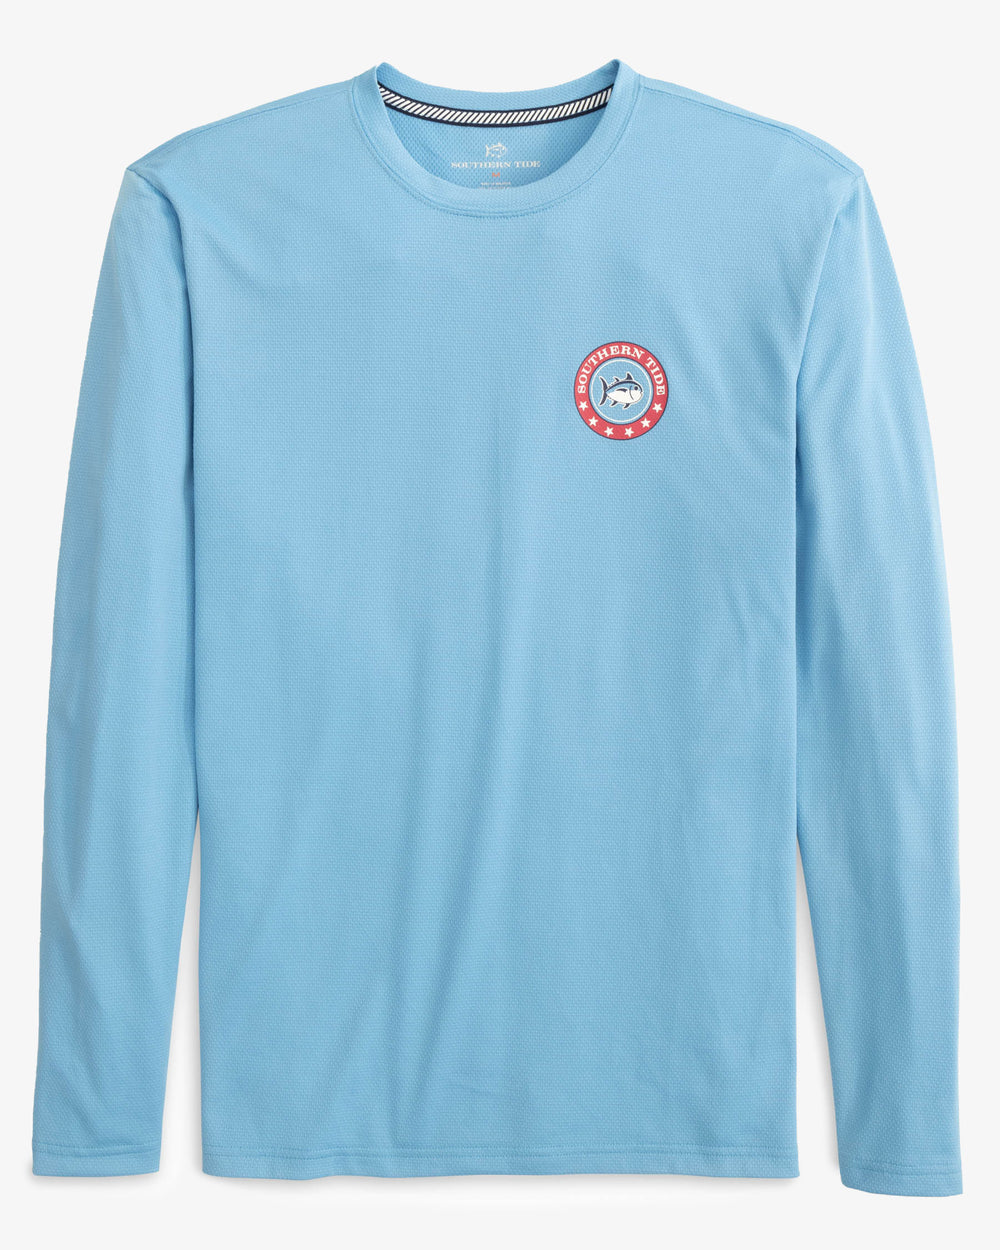 The front view of the Star Spangled Skipjack Long Sleeve Performance T-Shirt by Southern Tide - Heritage Blue